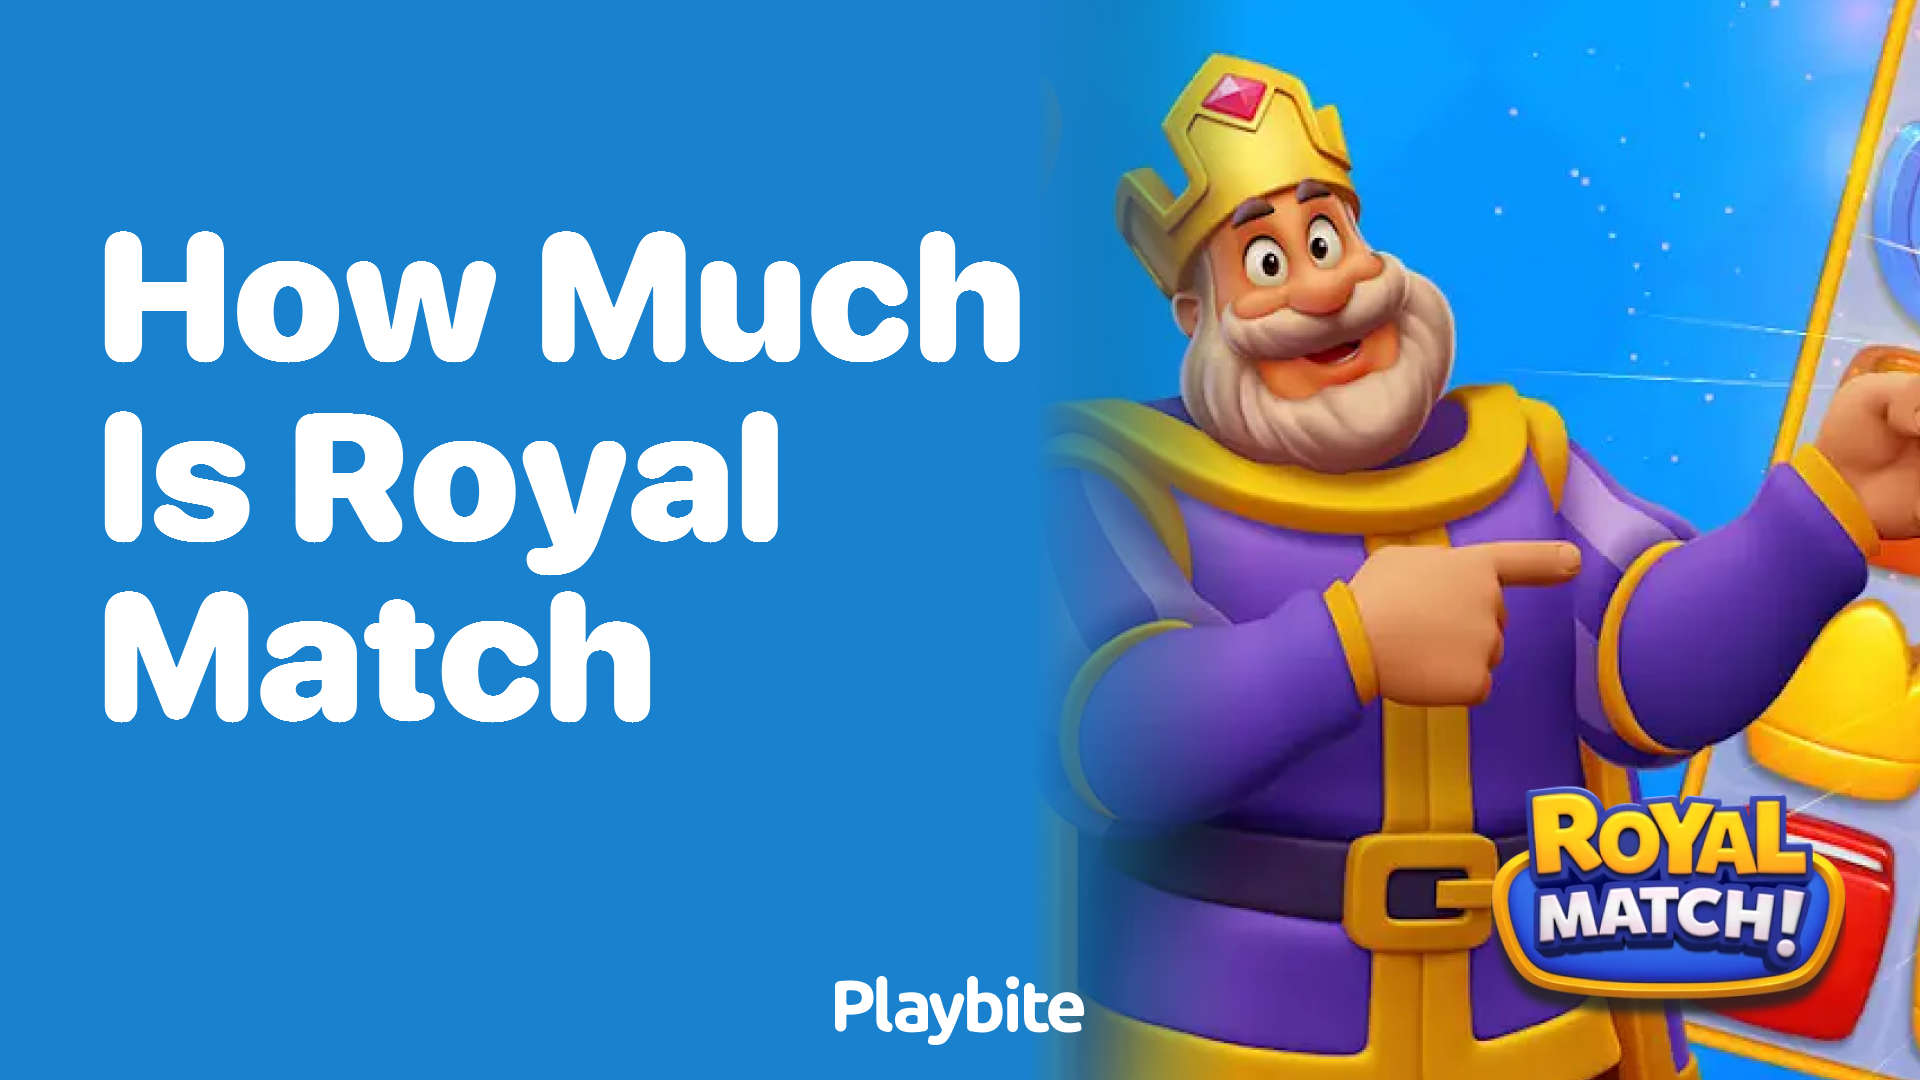 How Much Is Royal Match?